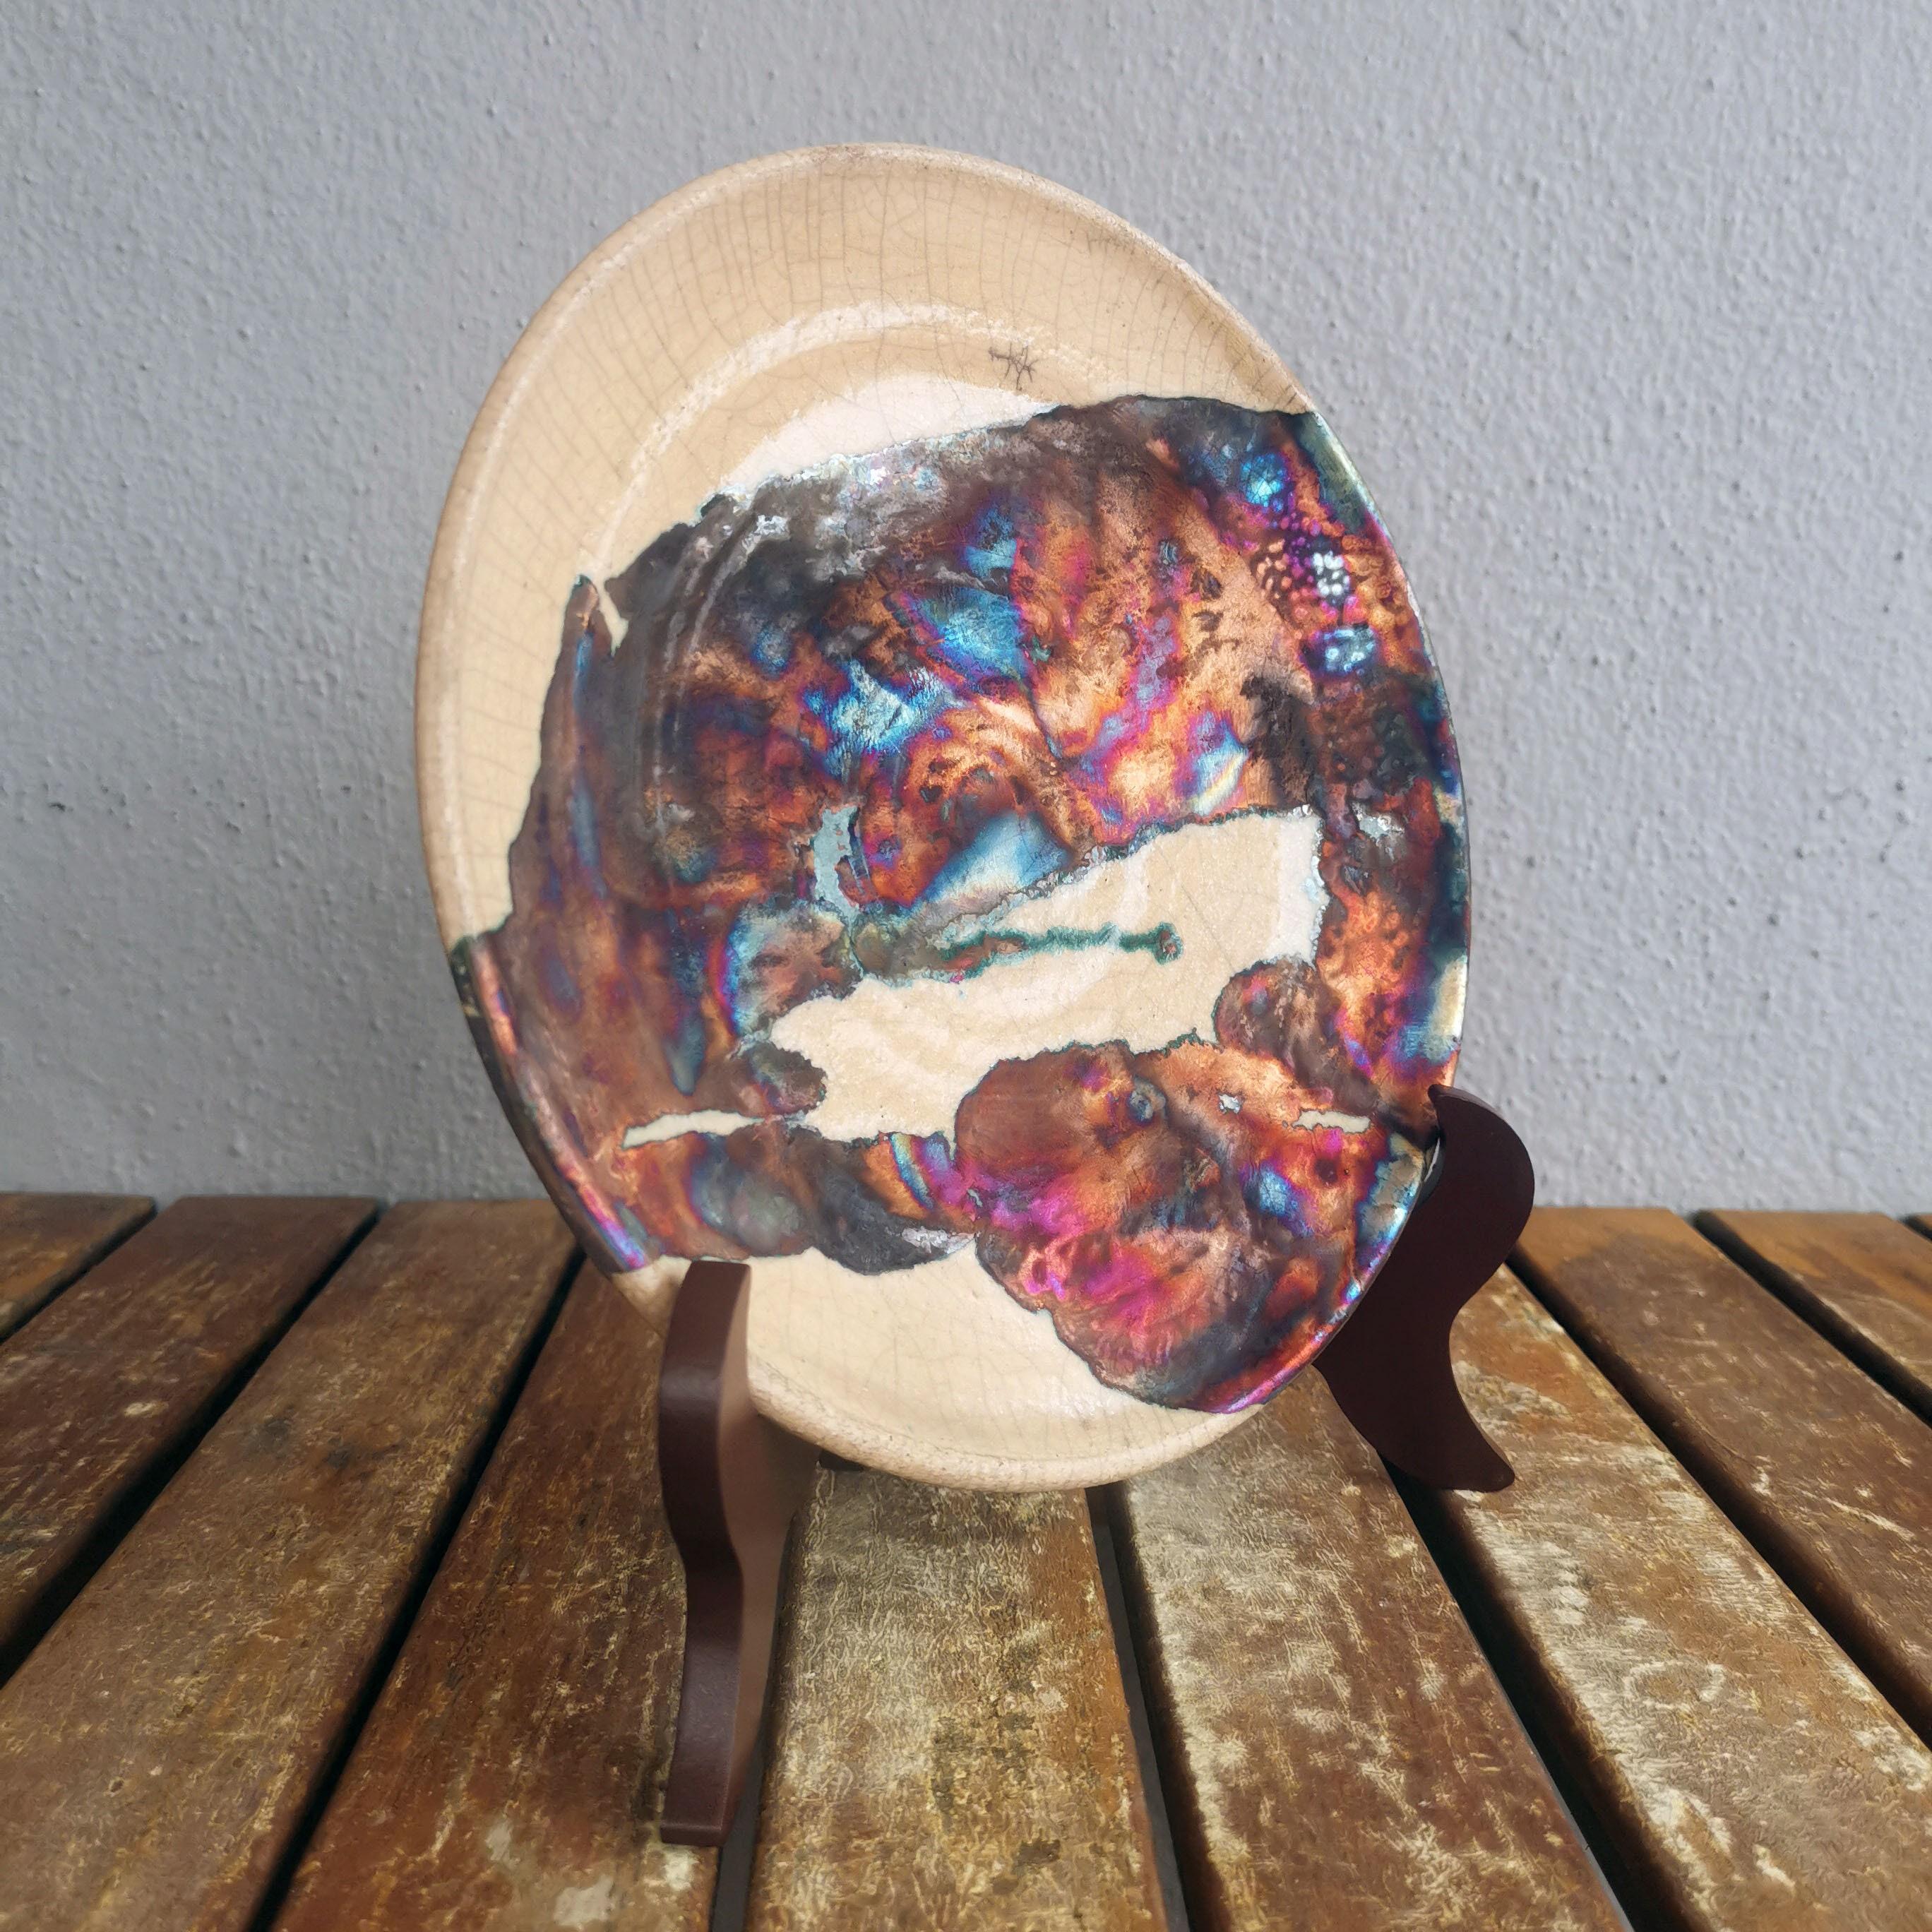 Sara ~ (皿) Plate

Our Sara decorative raku pottery plates are an expression of Raku in one of its most visible forms, a flat circular surface. Our Sara plates are best used hanging on your wall as a statement piece, a commemorative award, or as a